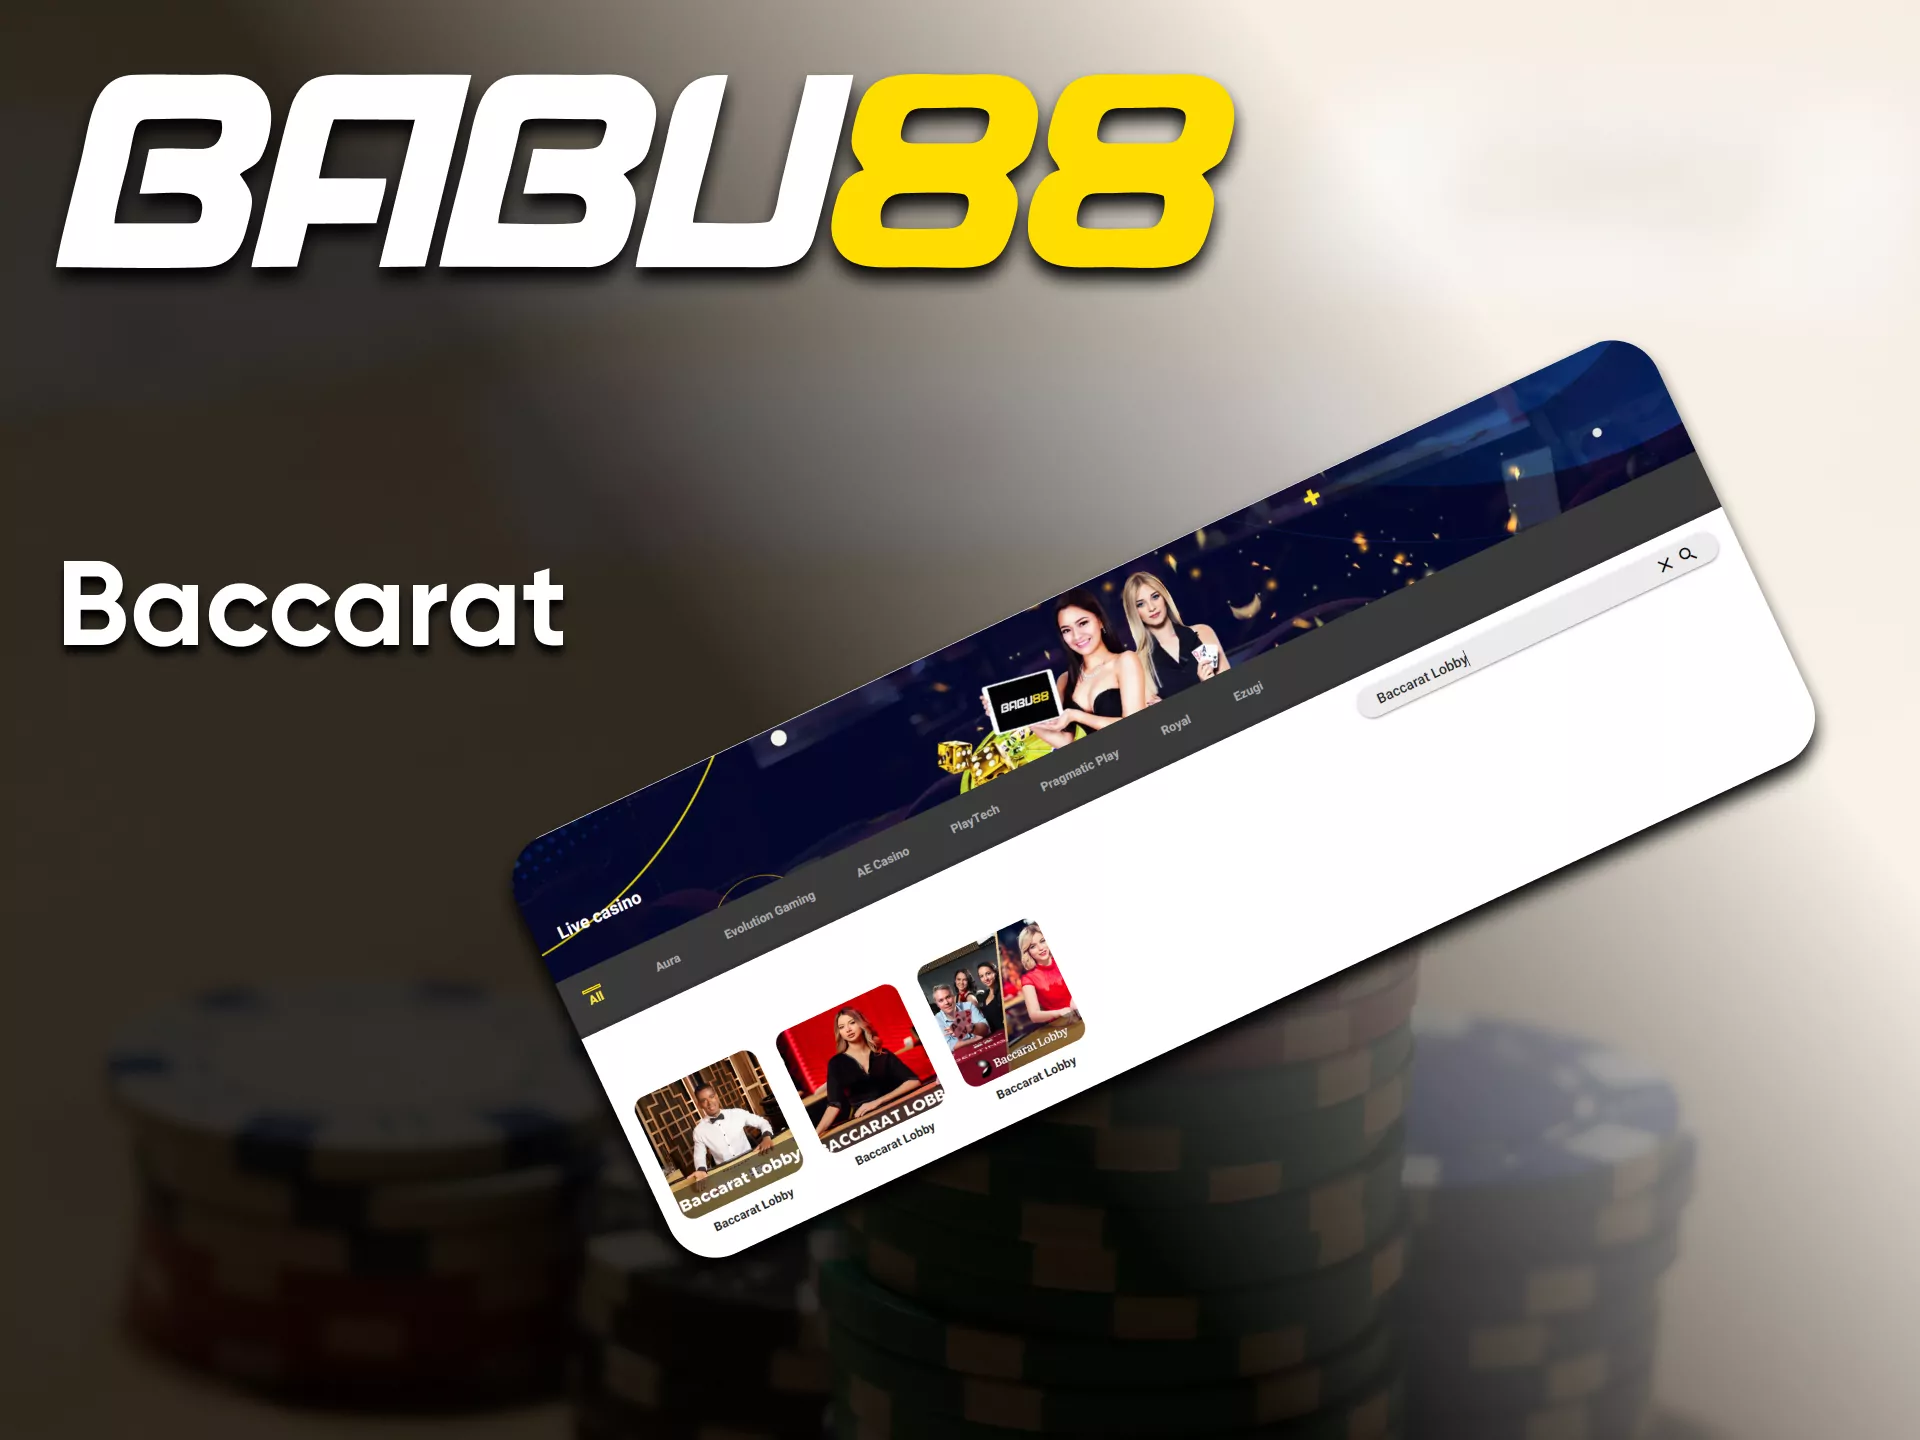 On the Babu88 you can play Baccarat.